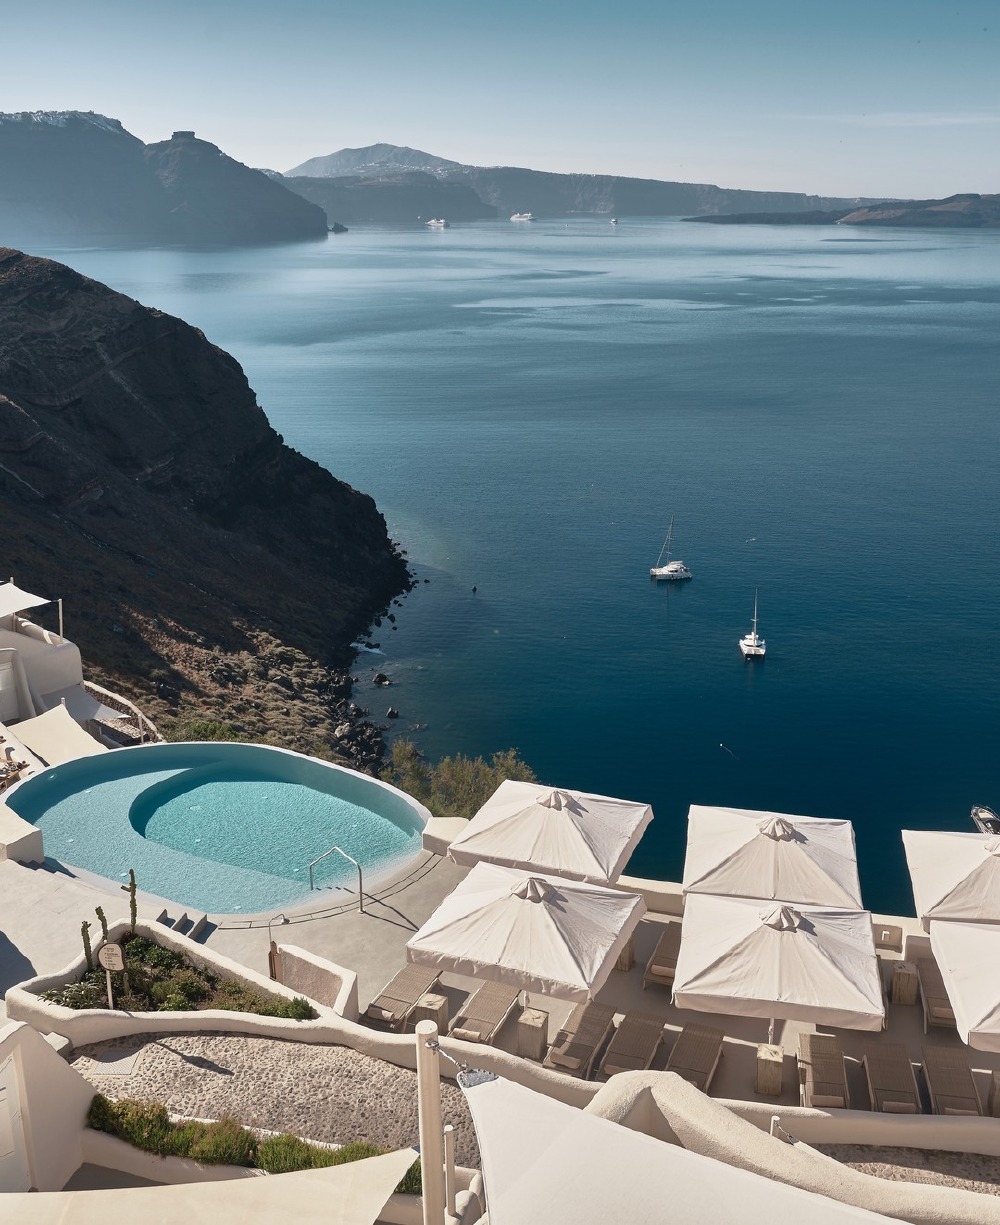 Best Infinity Pools in Europe for Couples: 10 Choices for The Ultimate Romantic Getaway